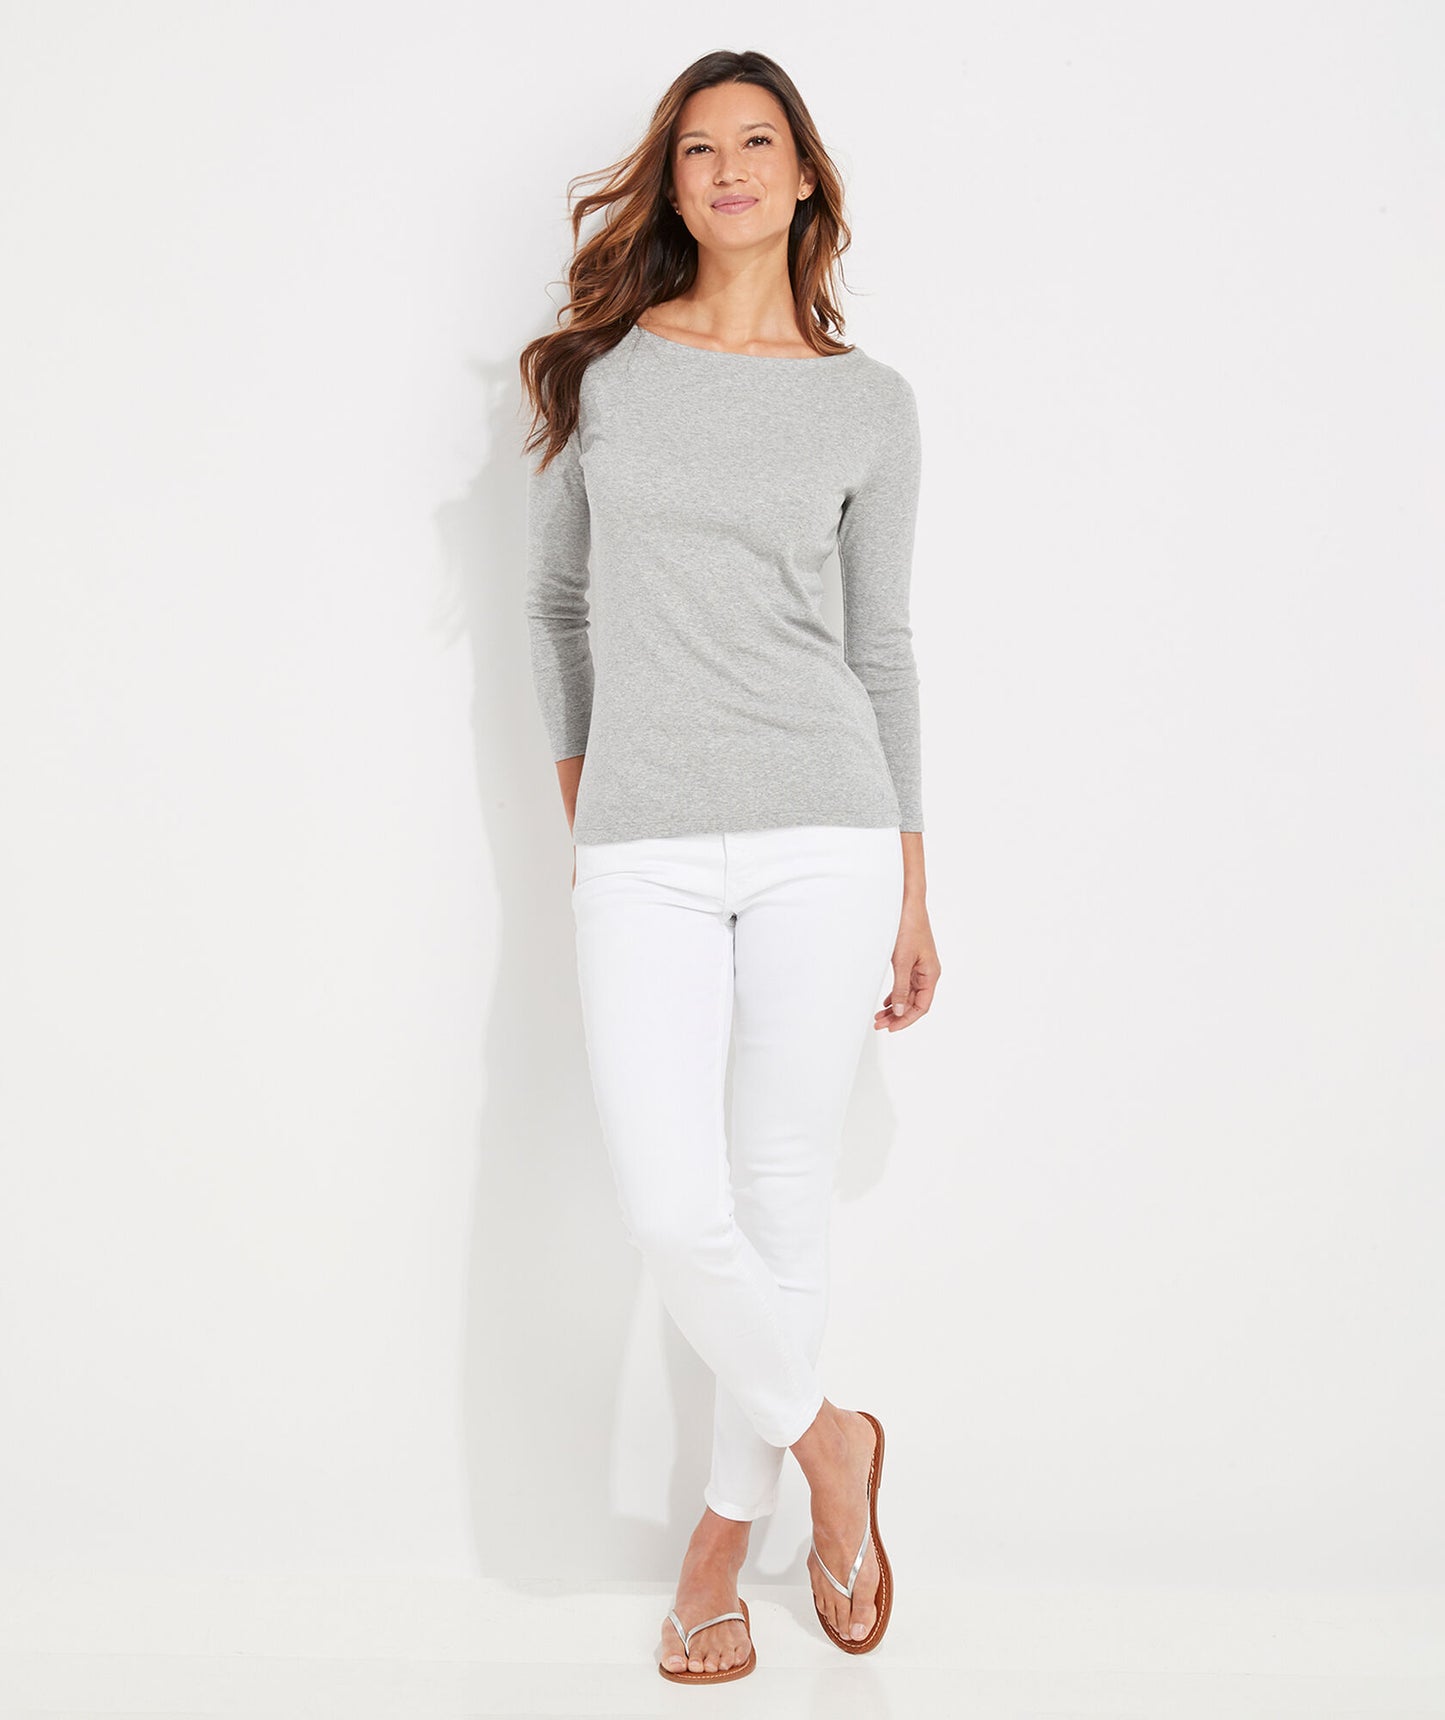 VV W Simple Boatneck Tee GRAY HEATHER